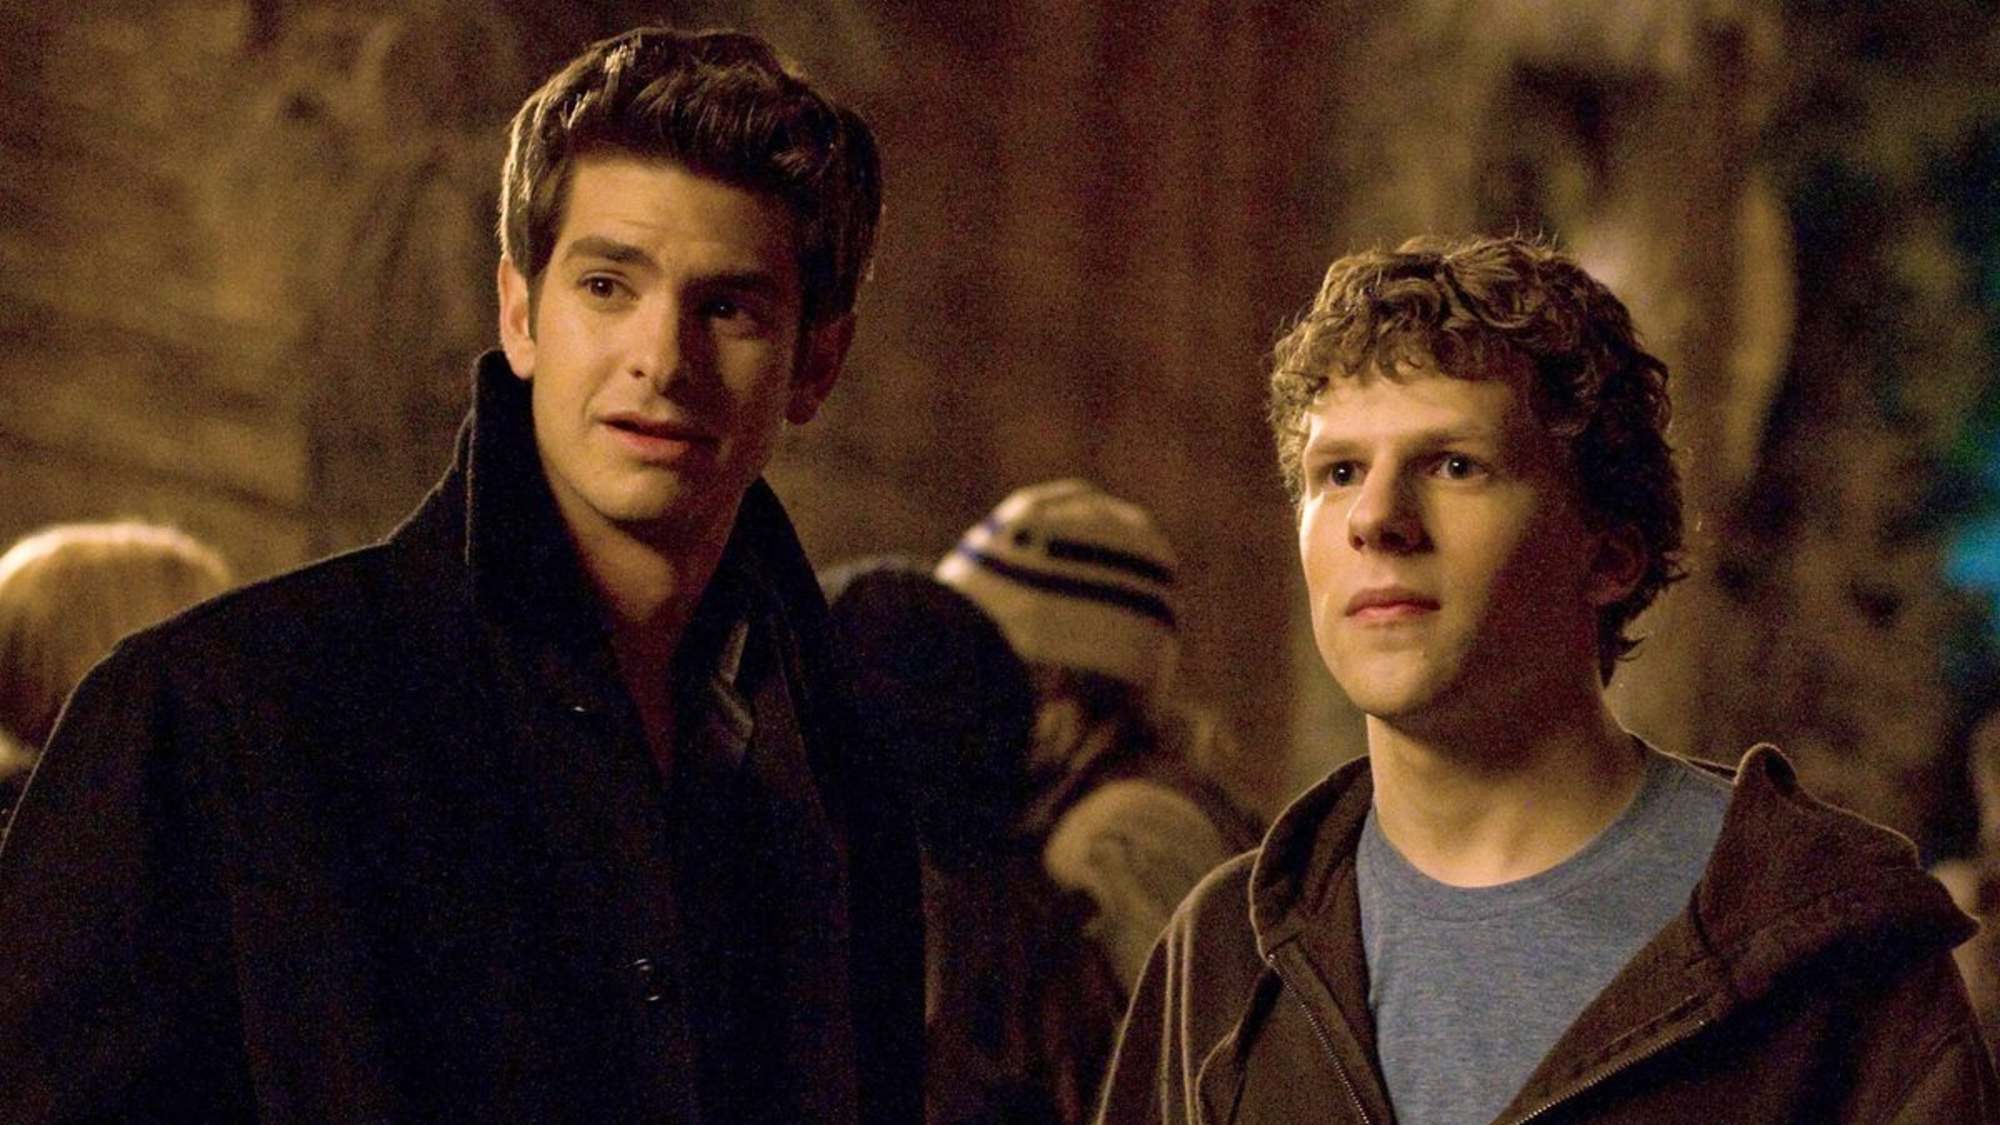 Andrew Garfield as Eduardo Saverin and Jesse Eisenberg as Mark Zuckerberg in The Social Network, one of the best Netflix movies